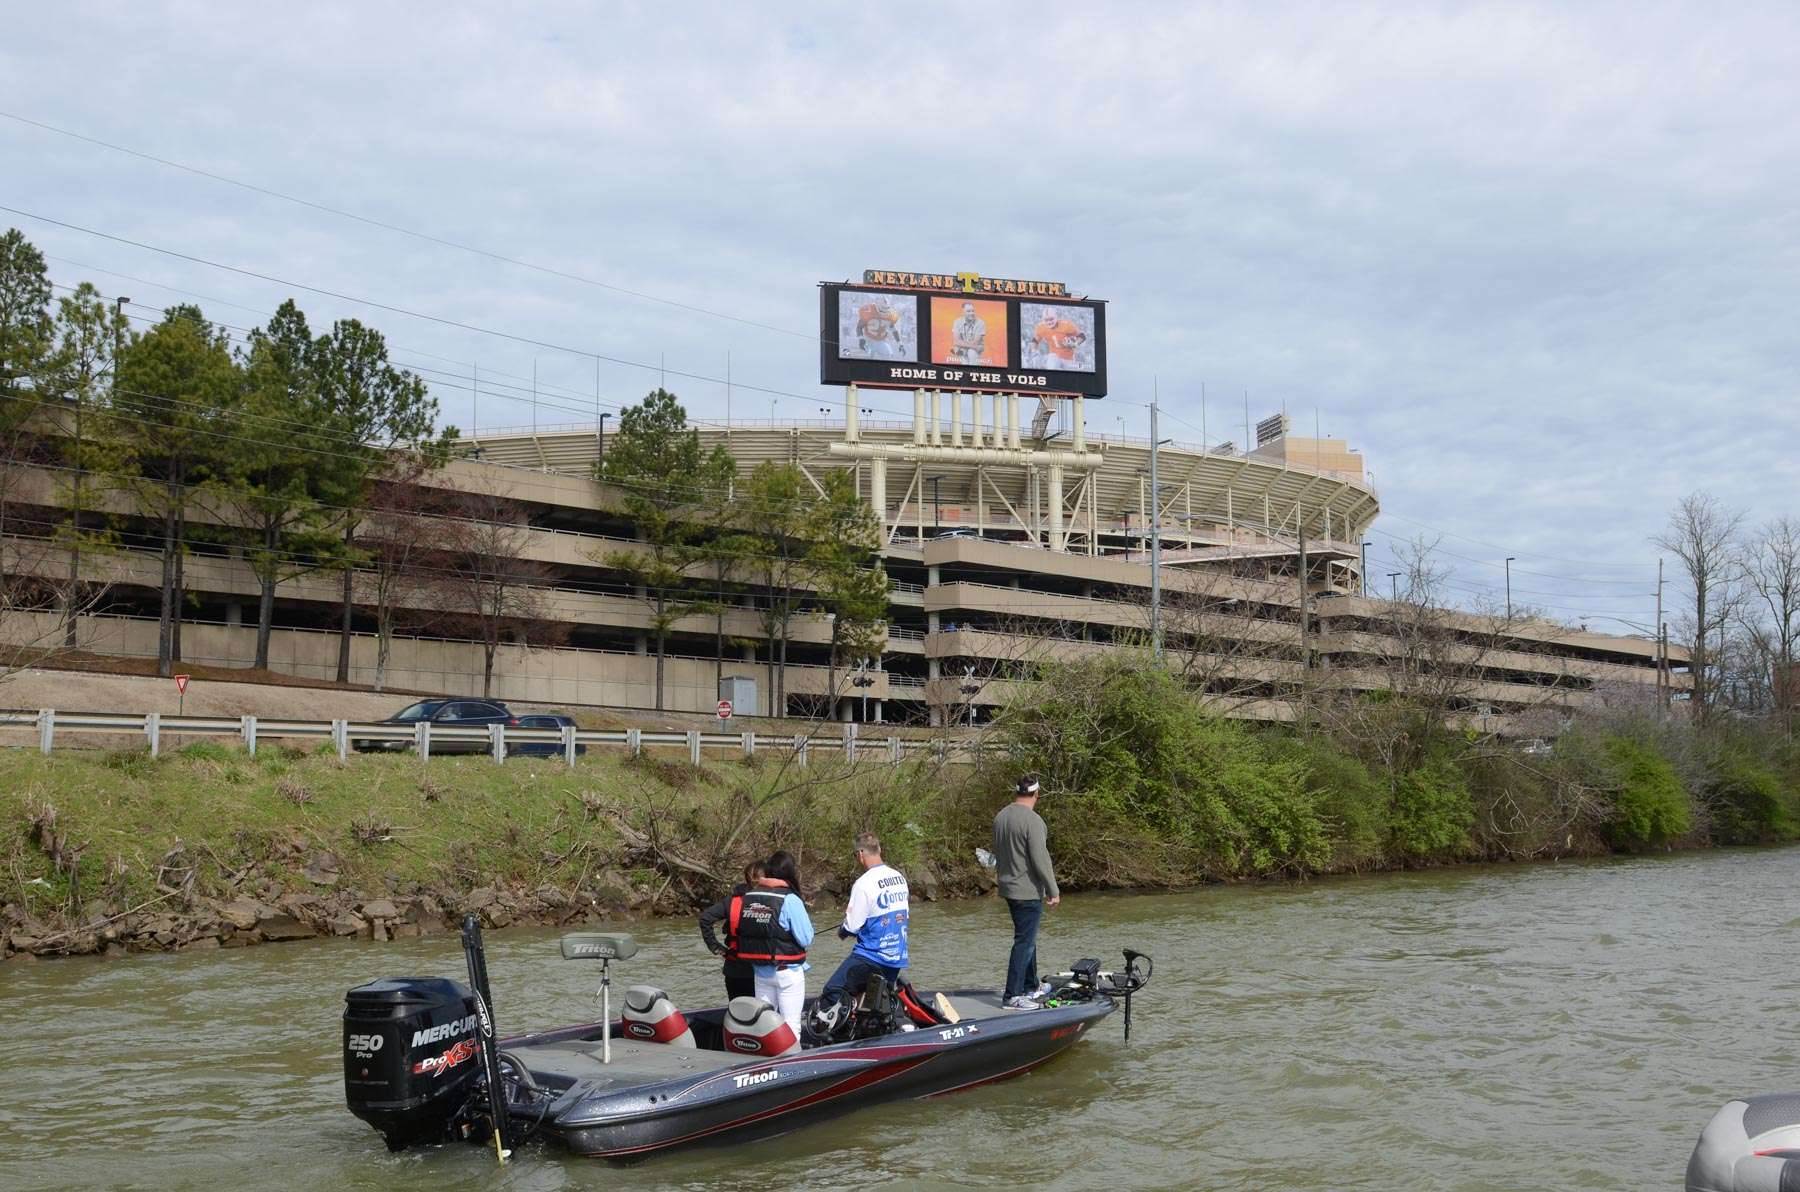 While Tennessee Gov. Bill Lee was officially opening the Bassmaster Classic Outdoors Expo  his wife  Maria  enjoyed a quick fishing outing and tour of the river



